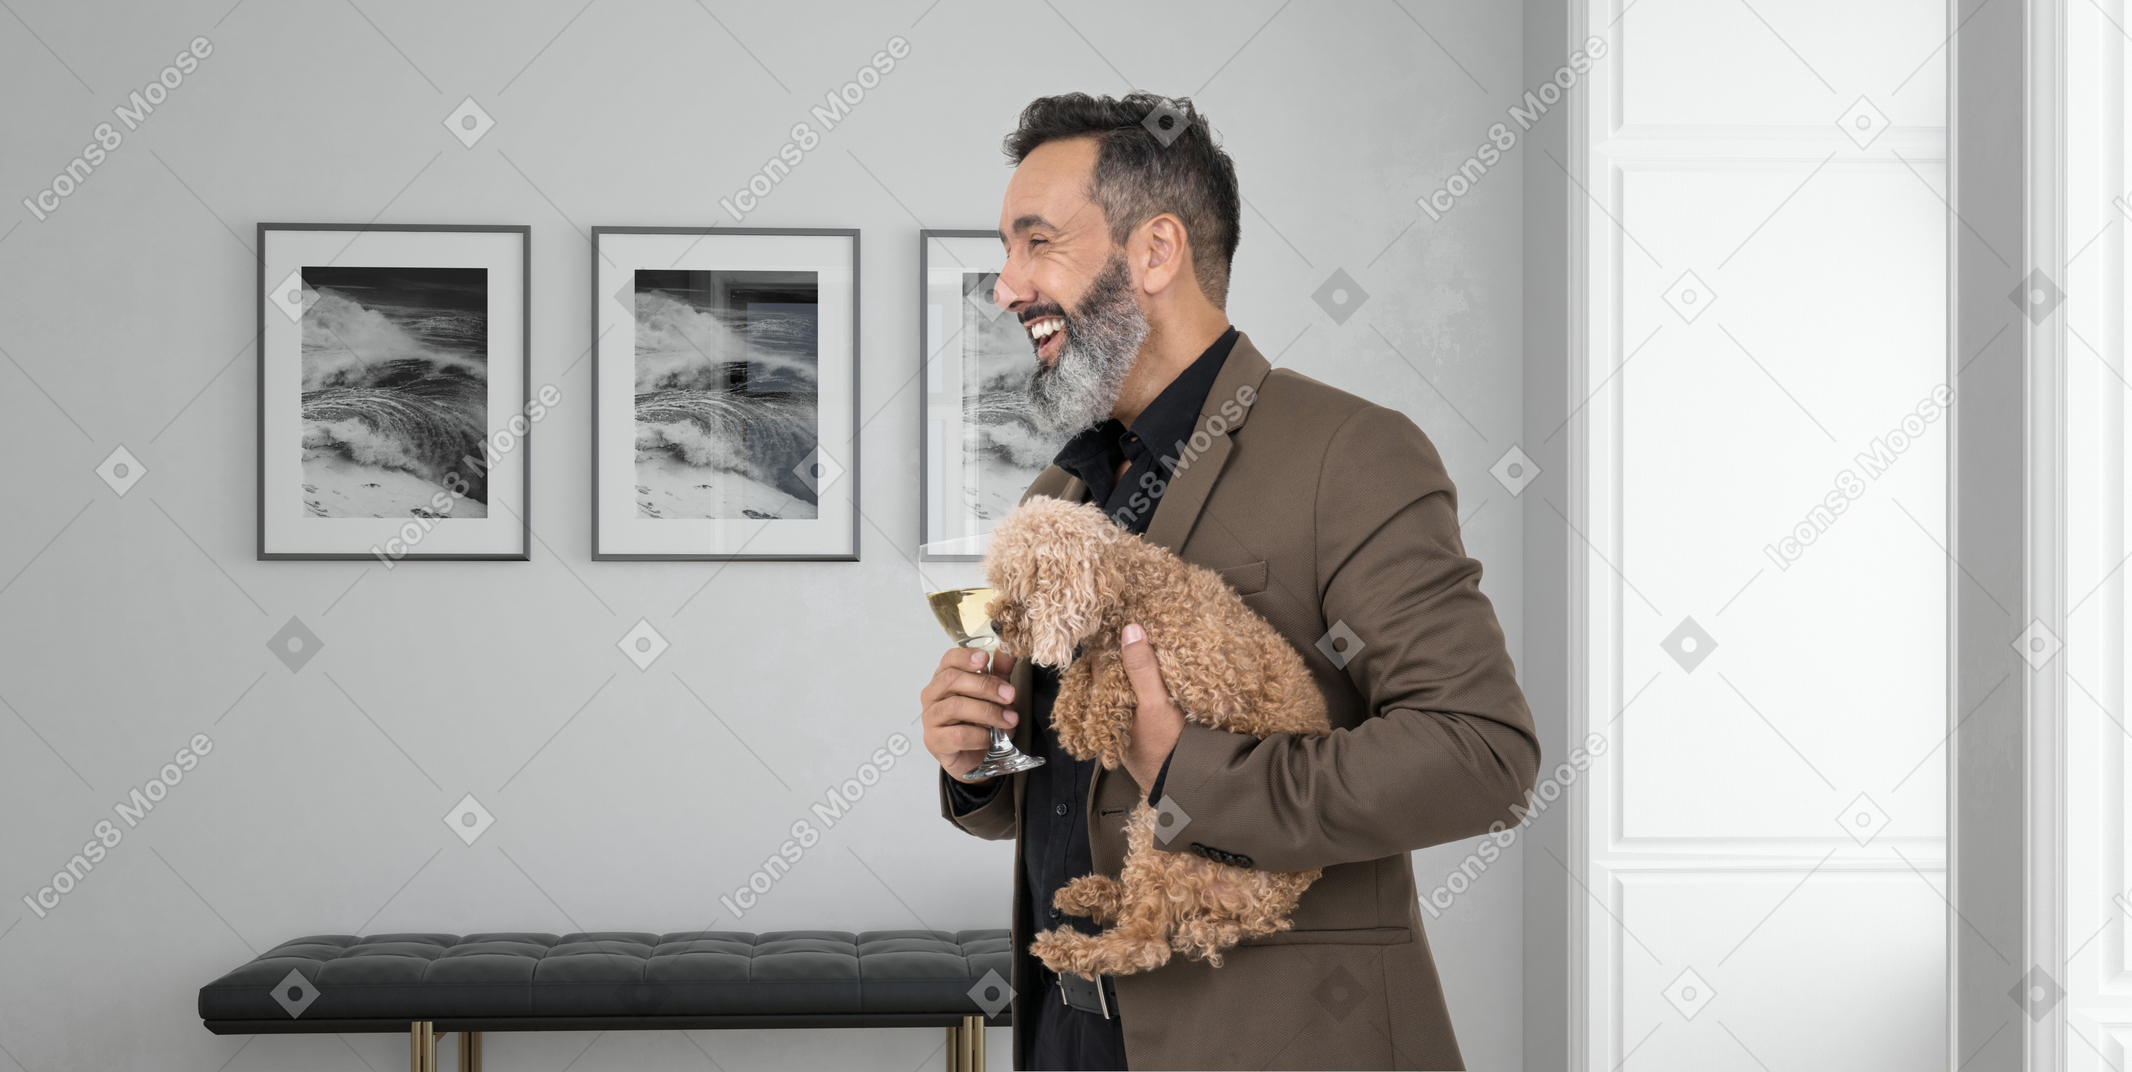 Mature man with a glass of champagne and a puppy standing in front of the posters in a gallery, talking and laughing